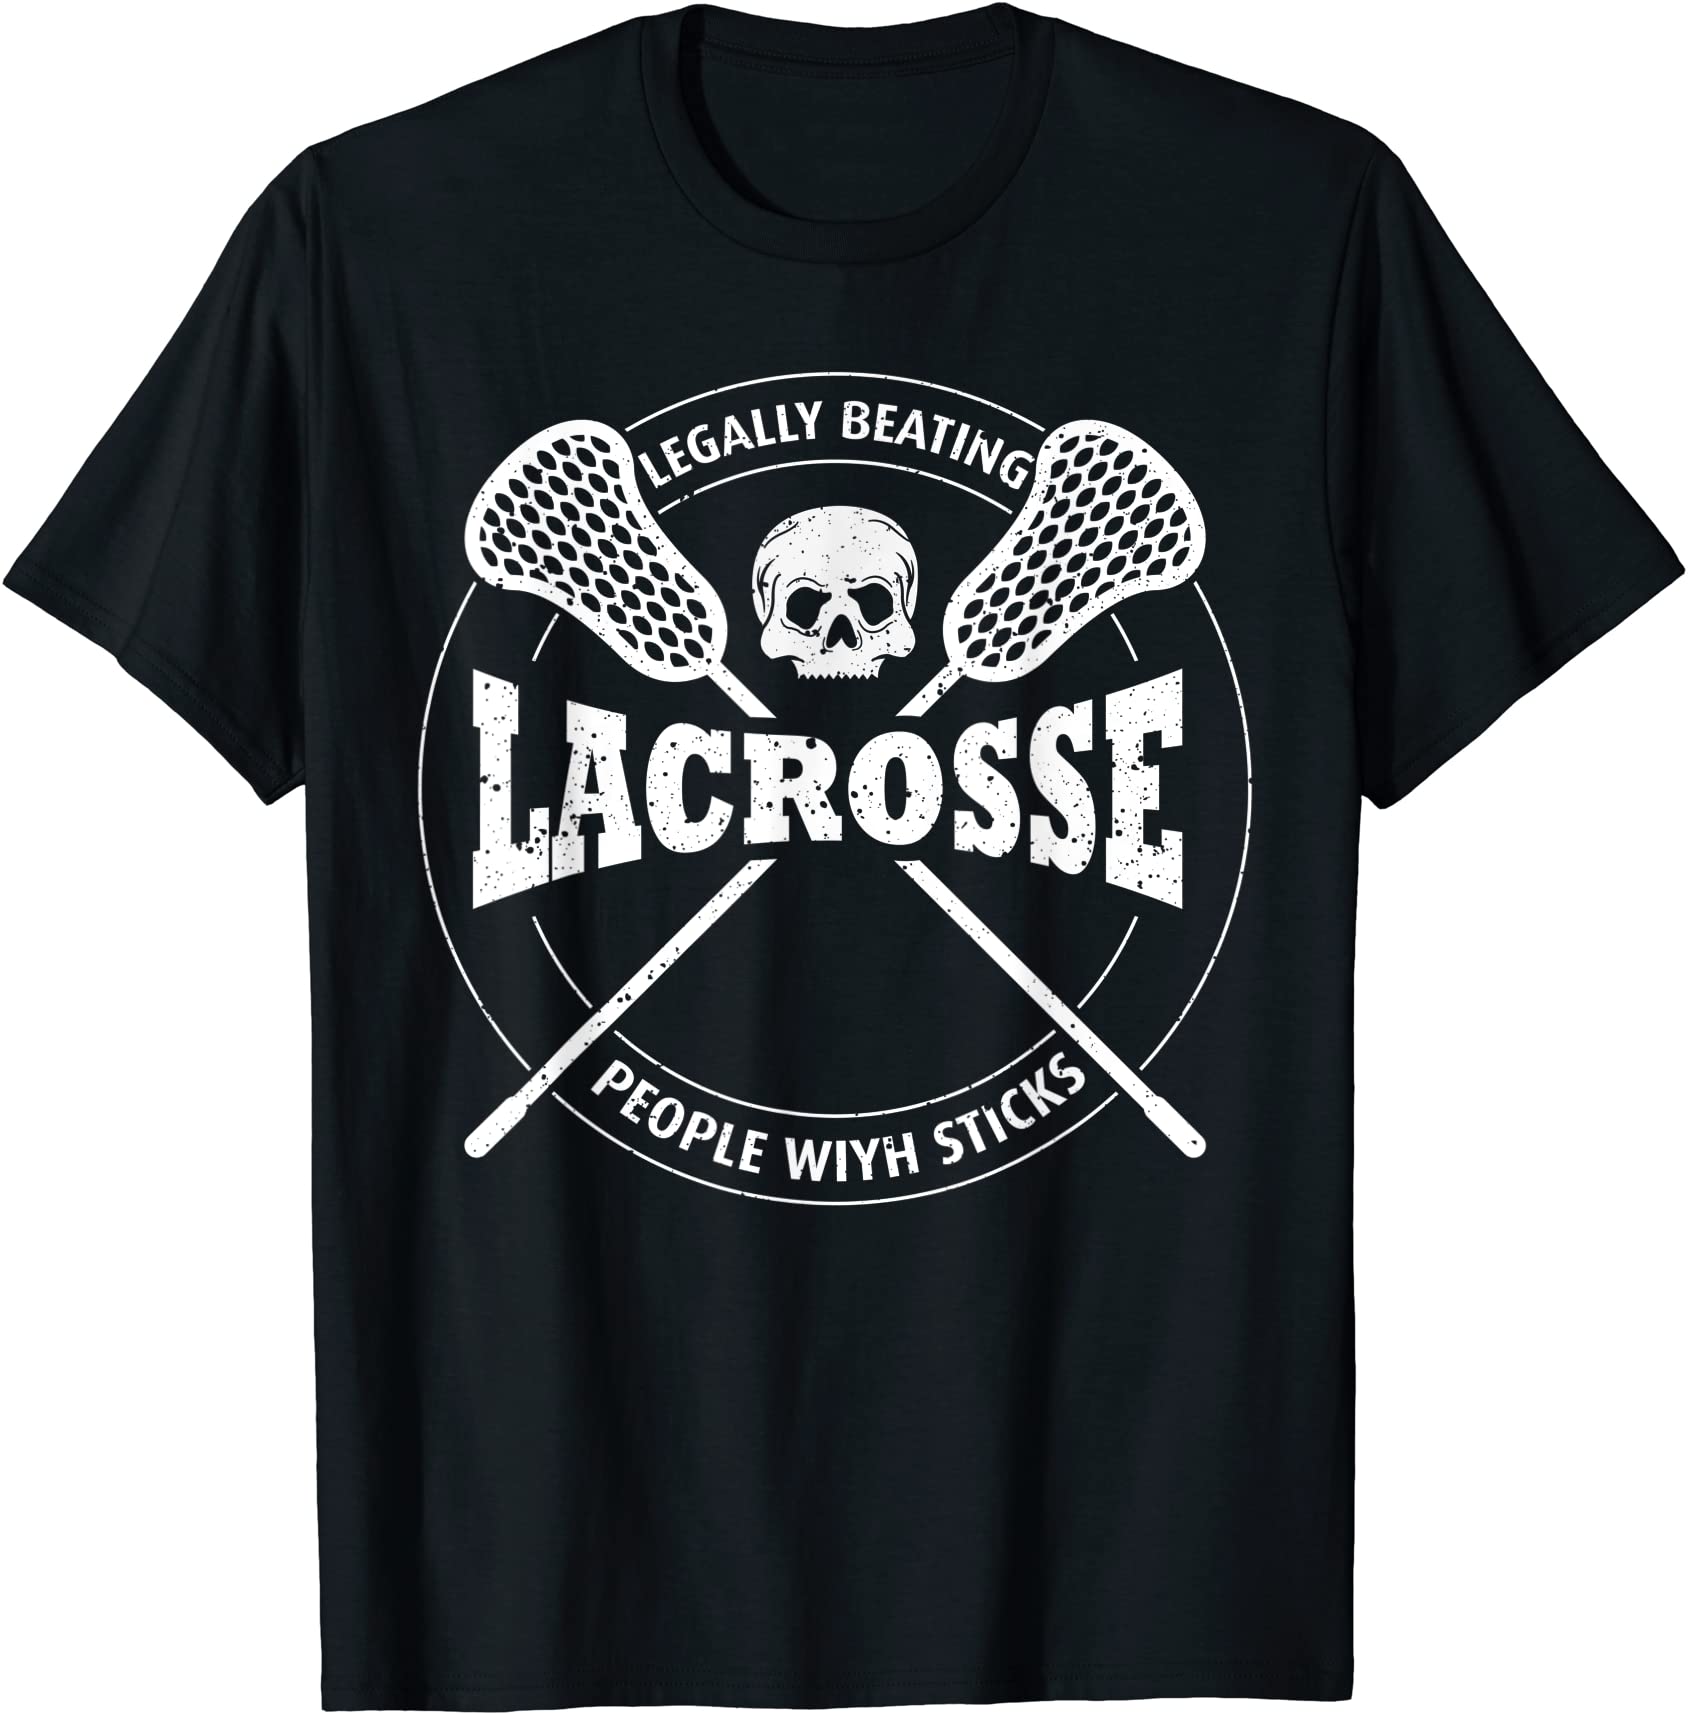 funny lacrosse clothing legally beating people with sticks t shirt men ...